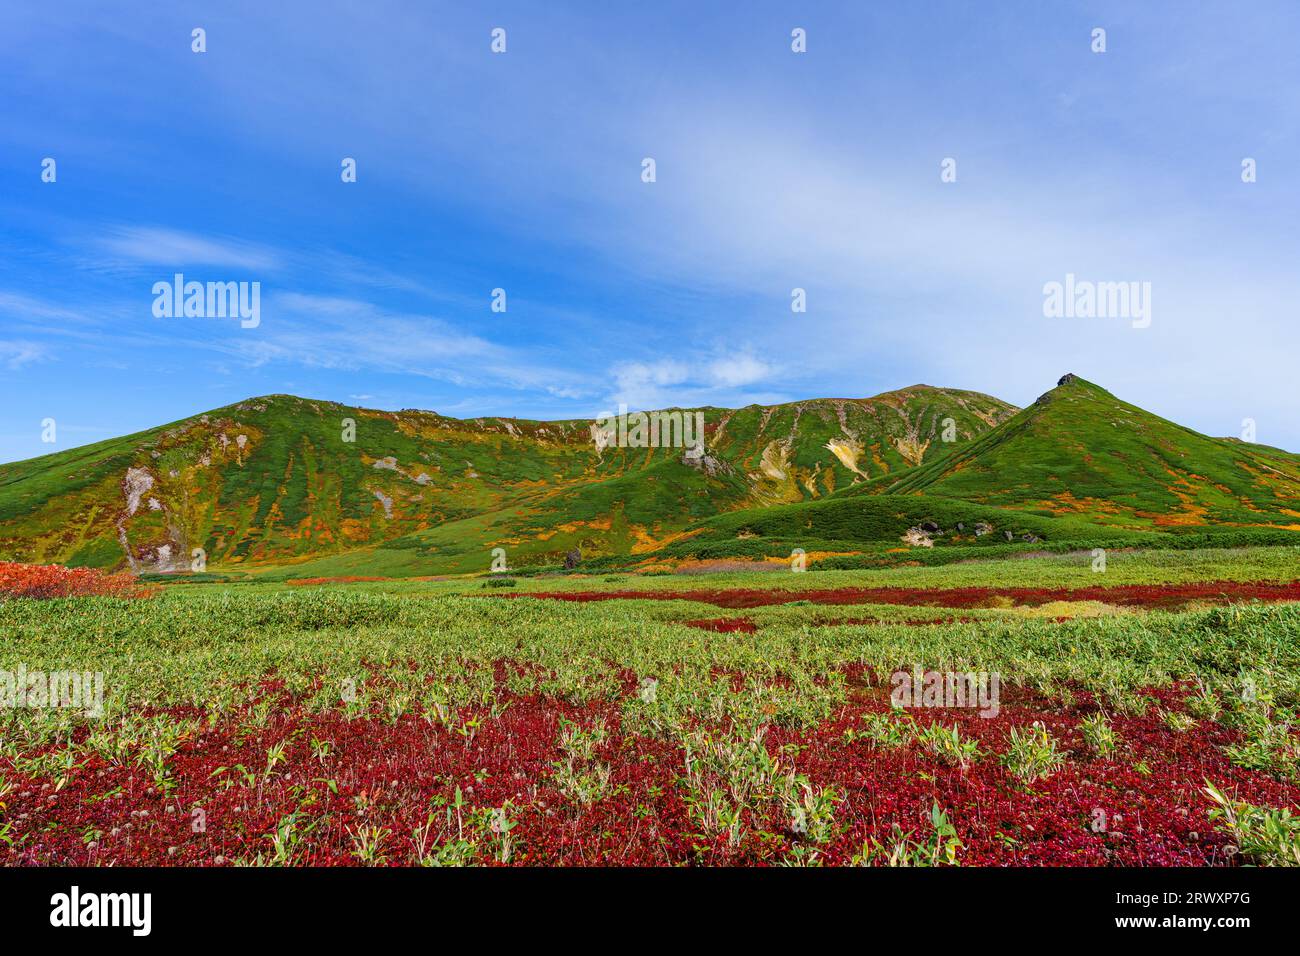 Blue sky, Susoai-daira Plateau, and red leaves of red-flowered camellia Stock Photo